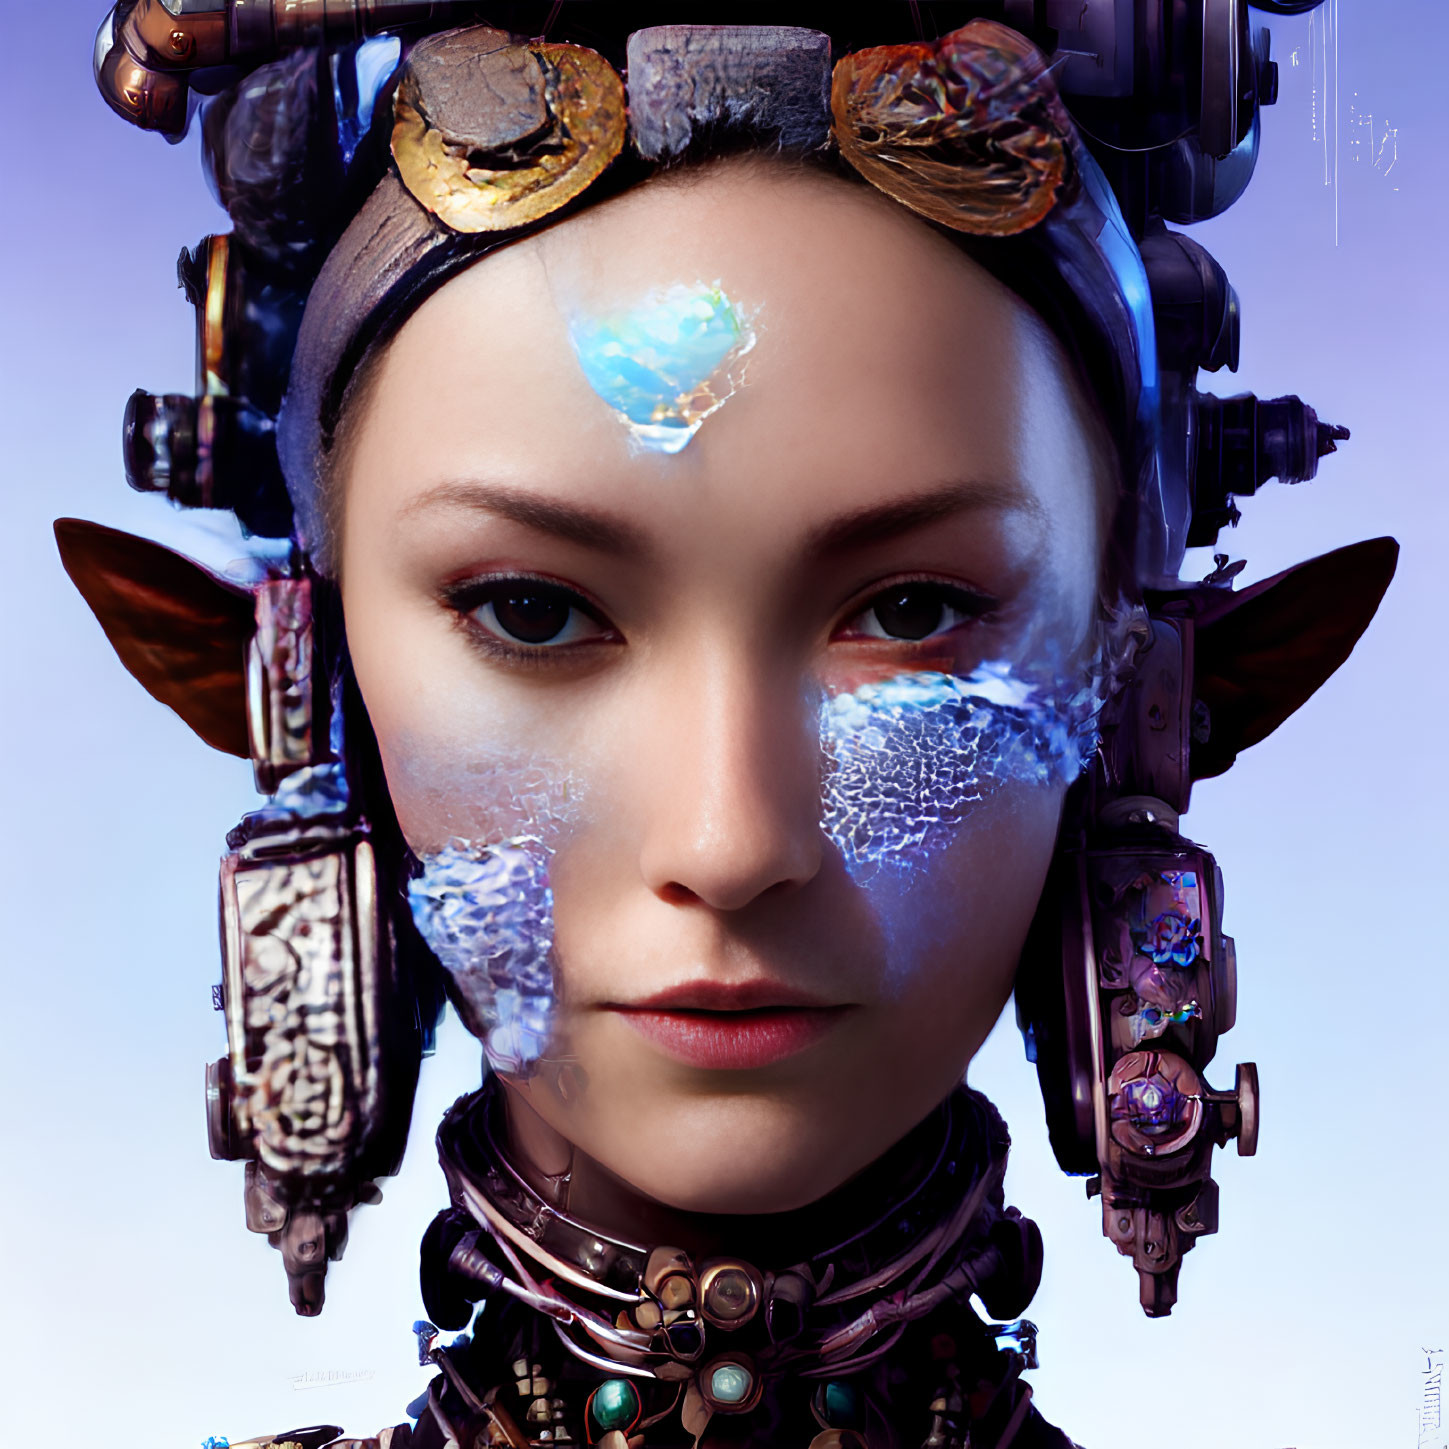 Digital portrait of female with elf-like ears, Asian features, futuristic adornments, and glowing blue mark